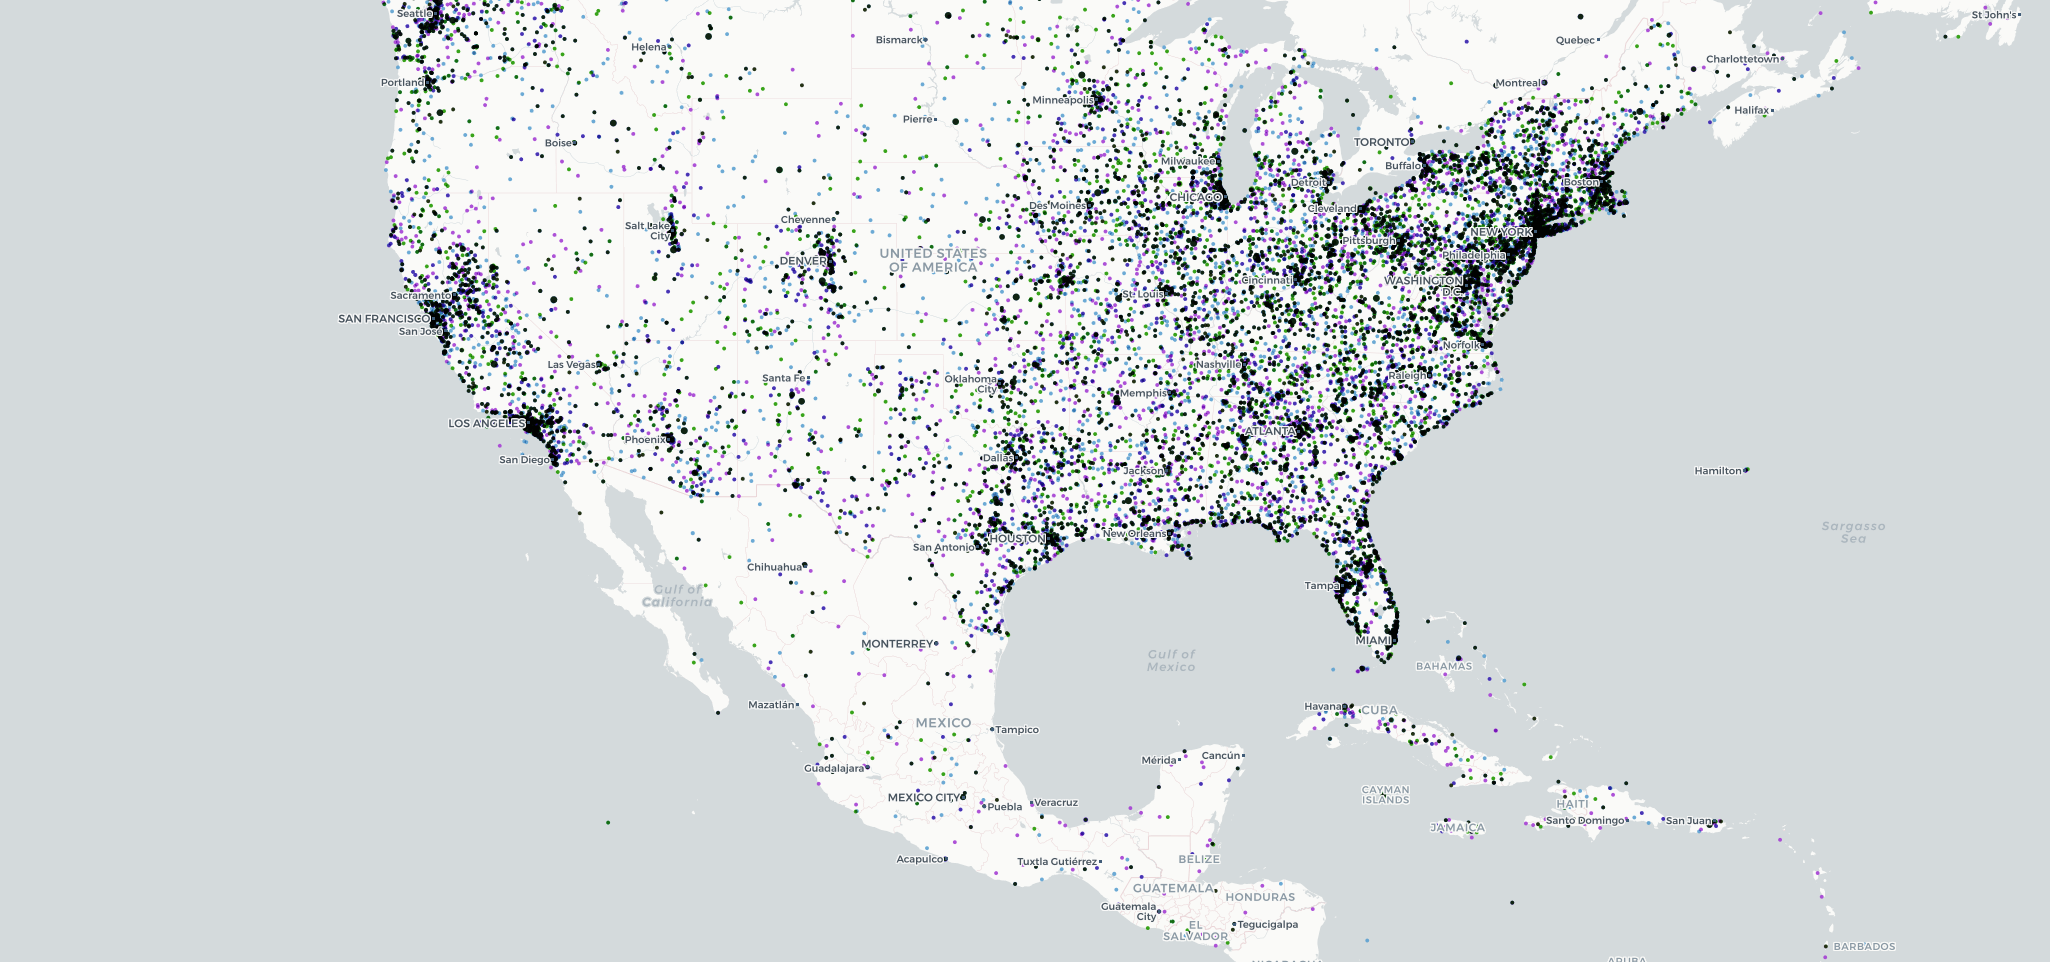 Visualizing the Geography of TV Stations